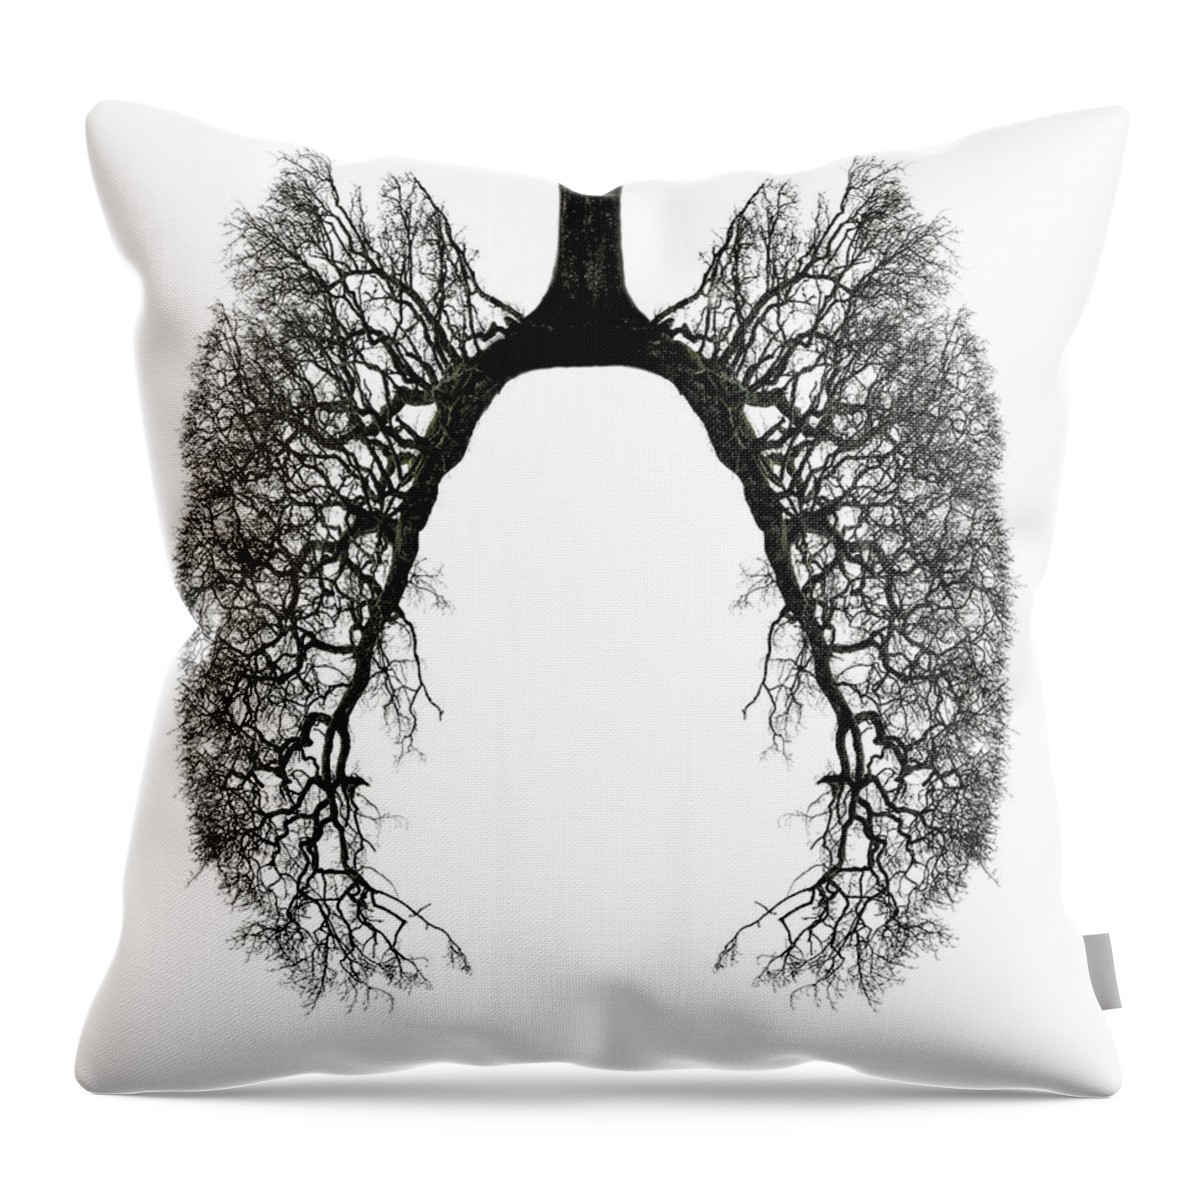 Human Lung Throw Pillow featuring the photograph Winter Tree Branches In The Shape Of by Mike Hill